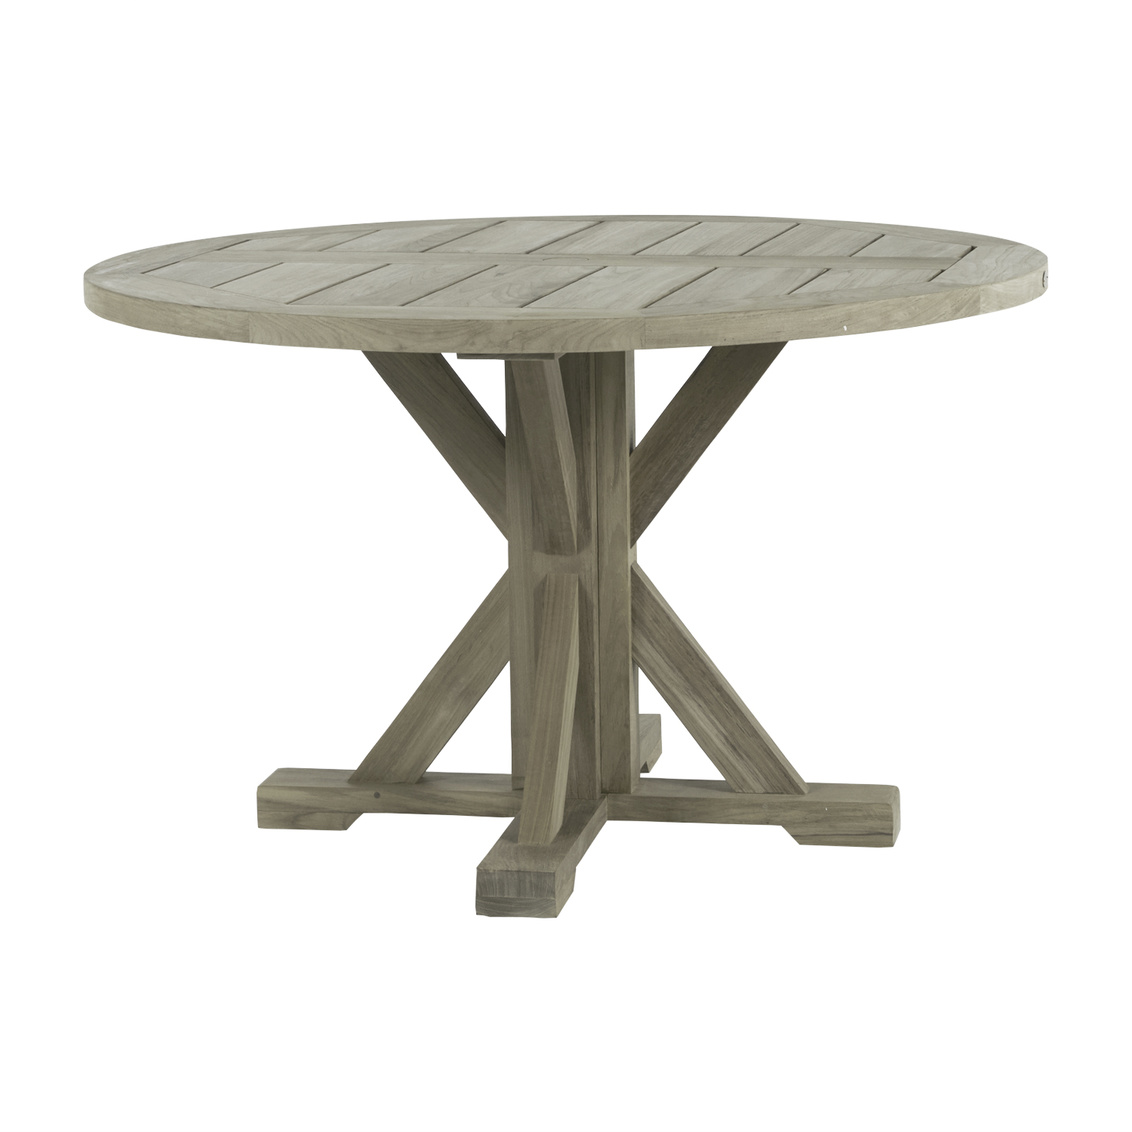 modena round dining table in oyster teak product image